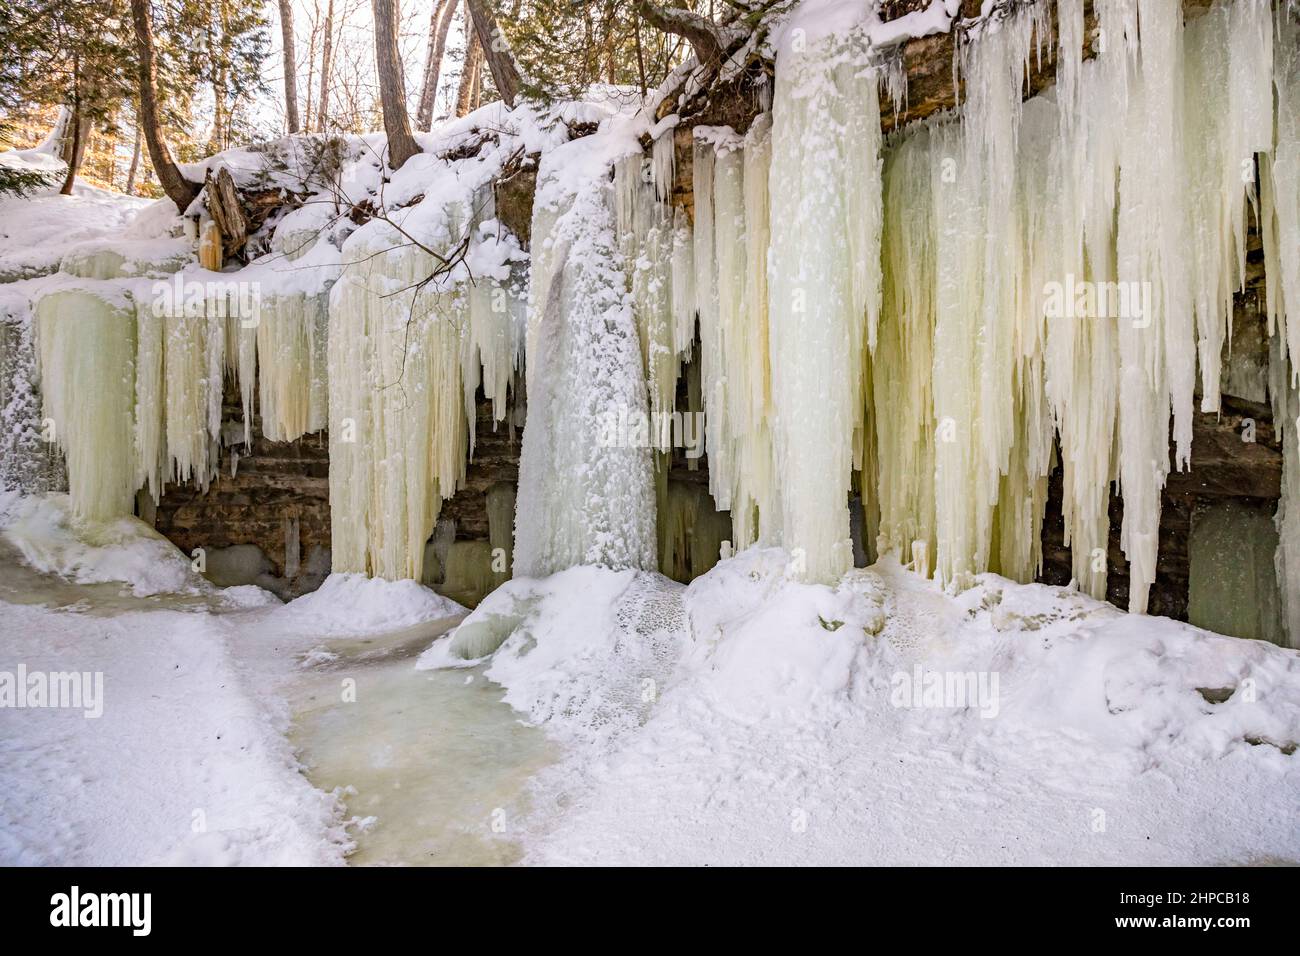 Eben Junction, Michigan - The Eben Ice Caves, also known as the Rock River Canyon Ice Caves. The caves are located in the Rock River Canyon Wilderness Stock Photo